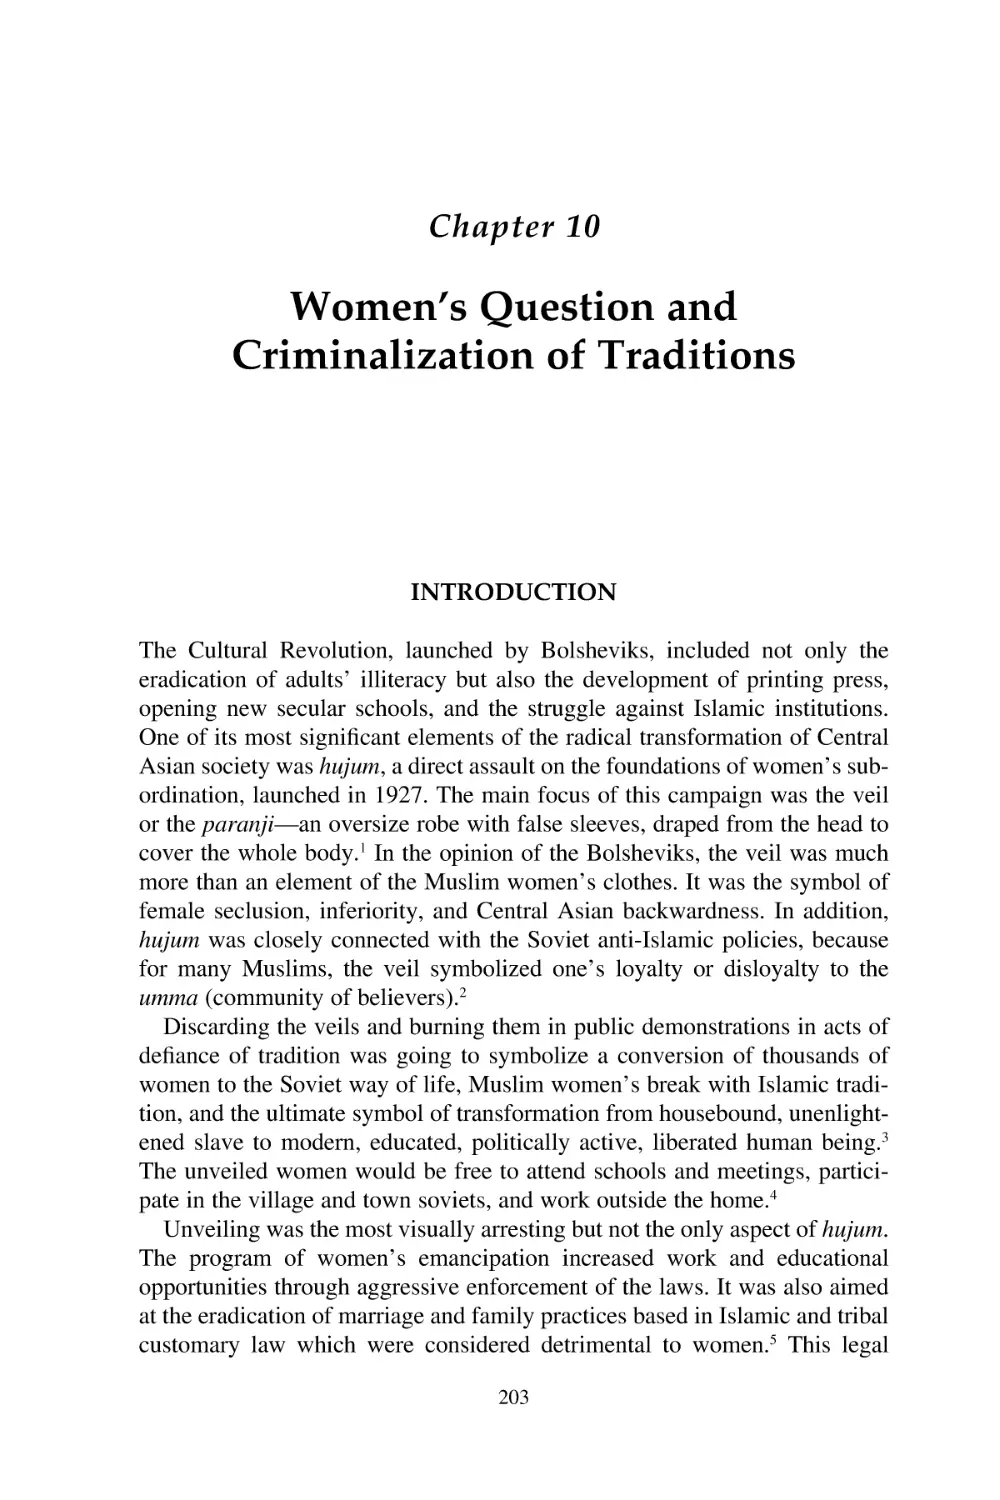 10. Women’s Question and Criminalization of Traditions